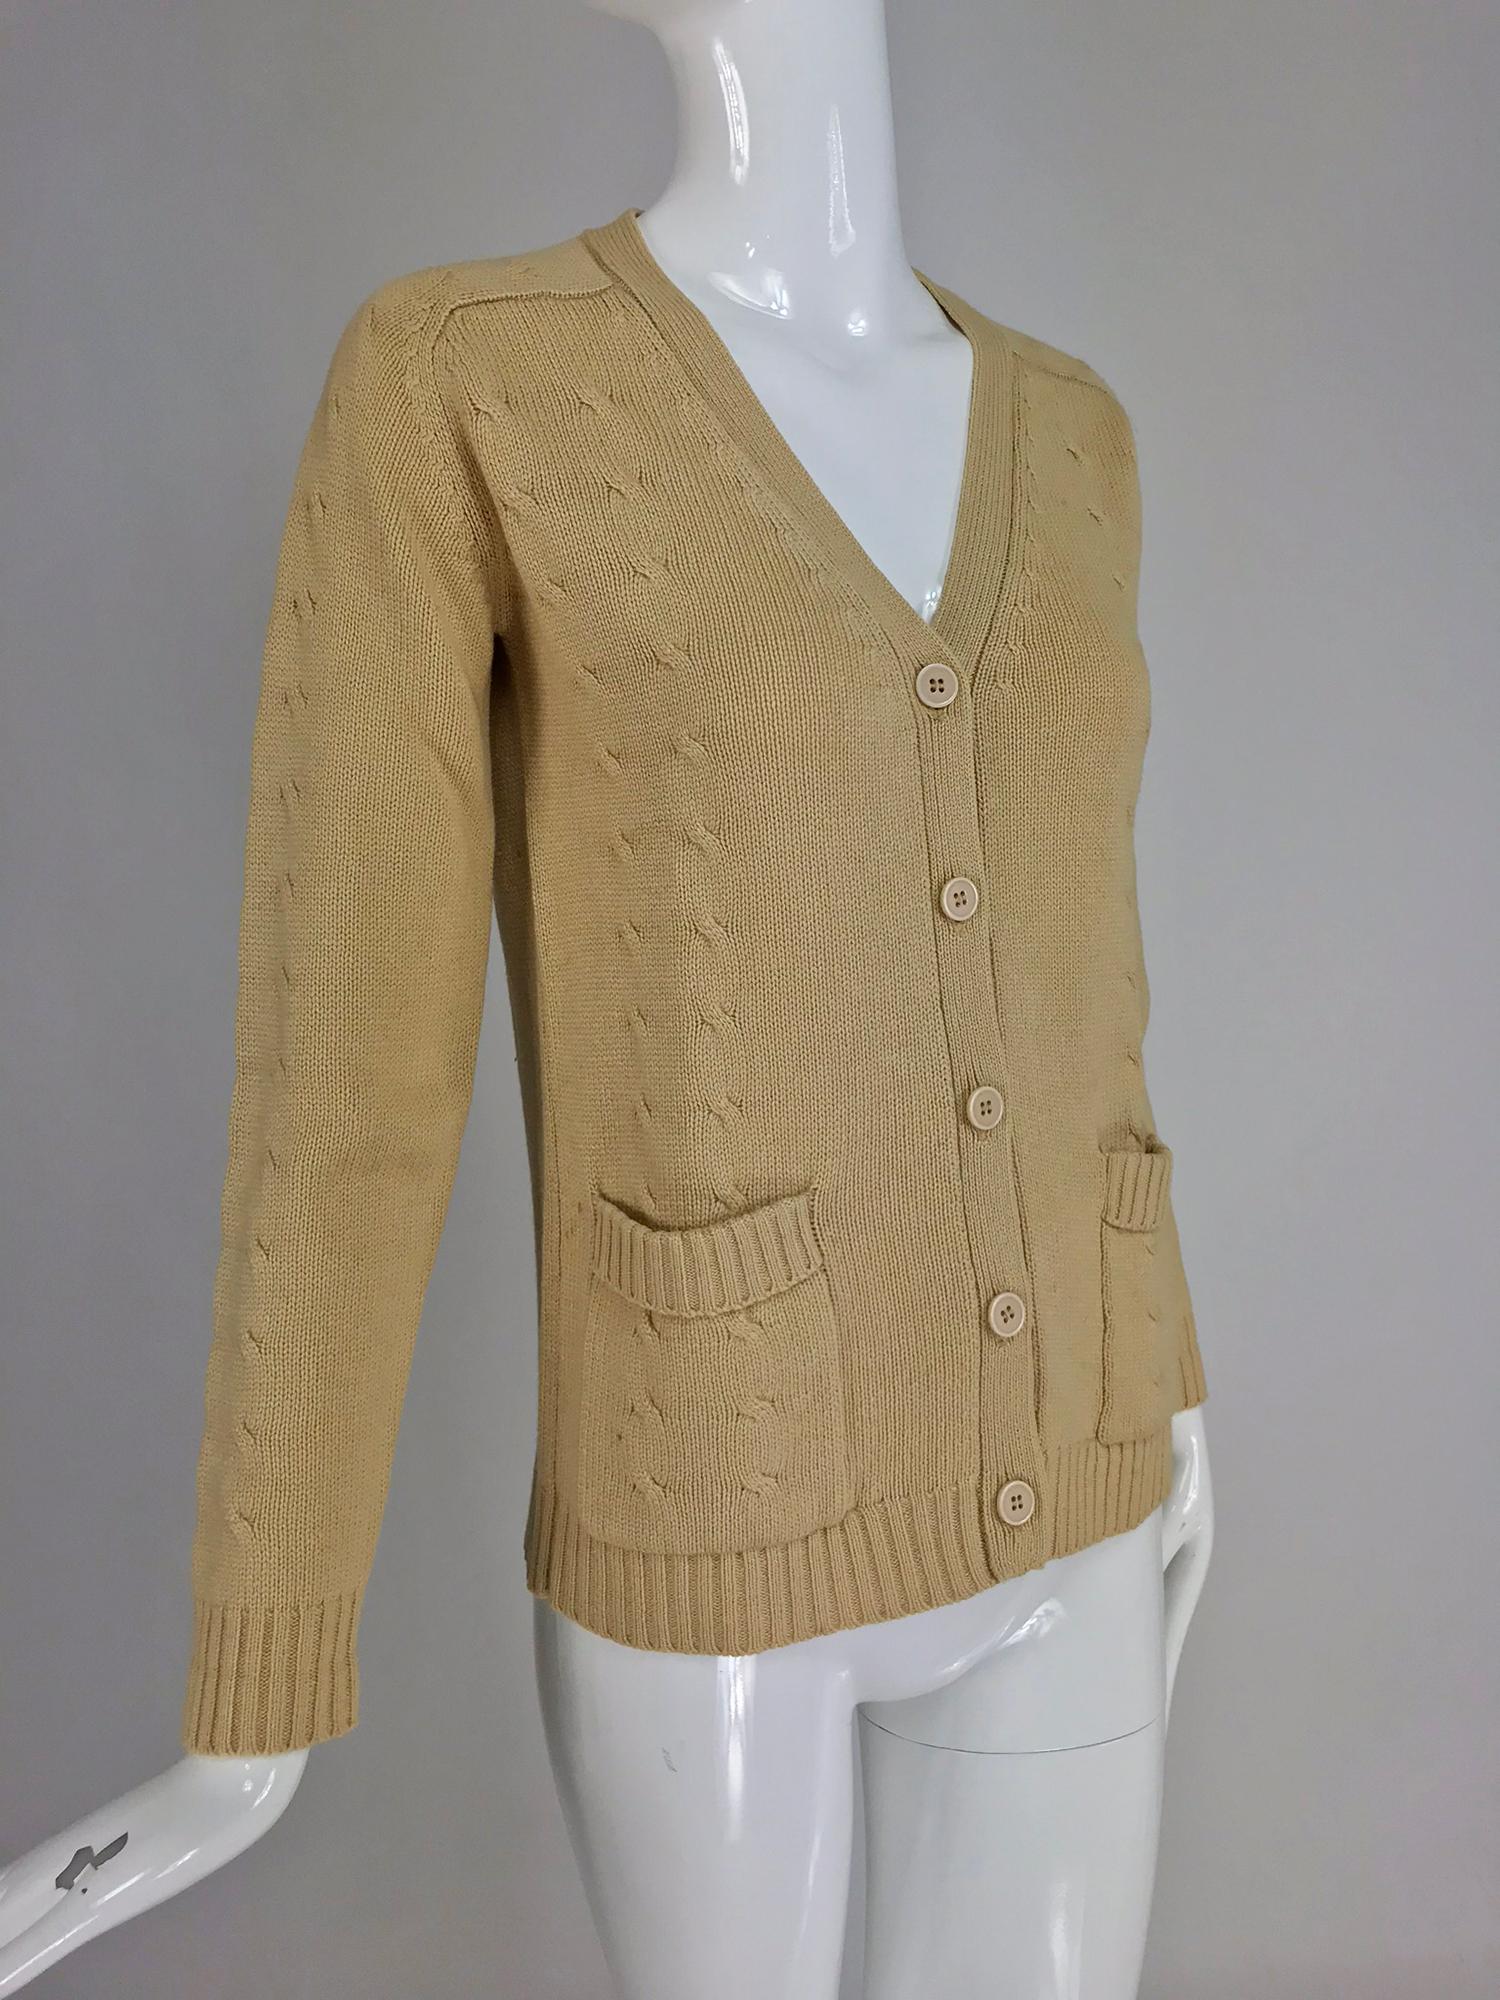 Hermes tan cashmere silk cable knit cardigan sweater from the 1960s. Boyfriend style, button front sweater with a v neckline and hip front patch pockets. The front and outer sleeves are done in a cable design. Raglan sleeve sweater is unlined. There